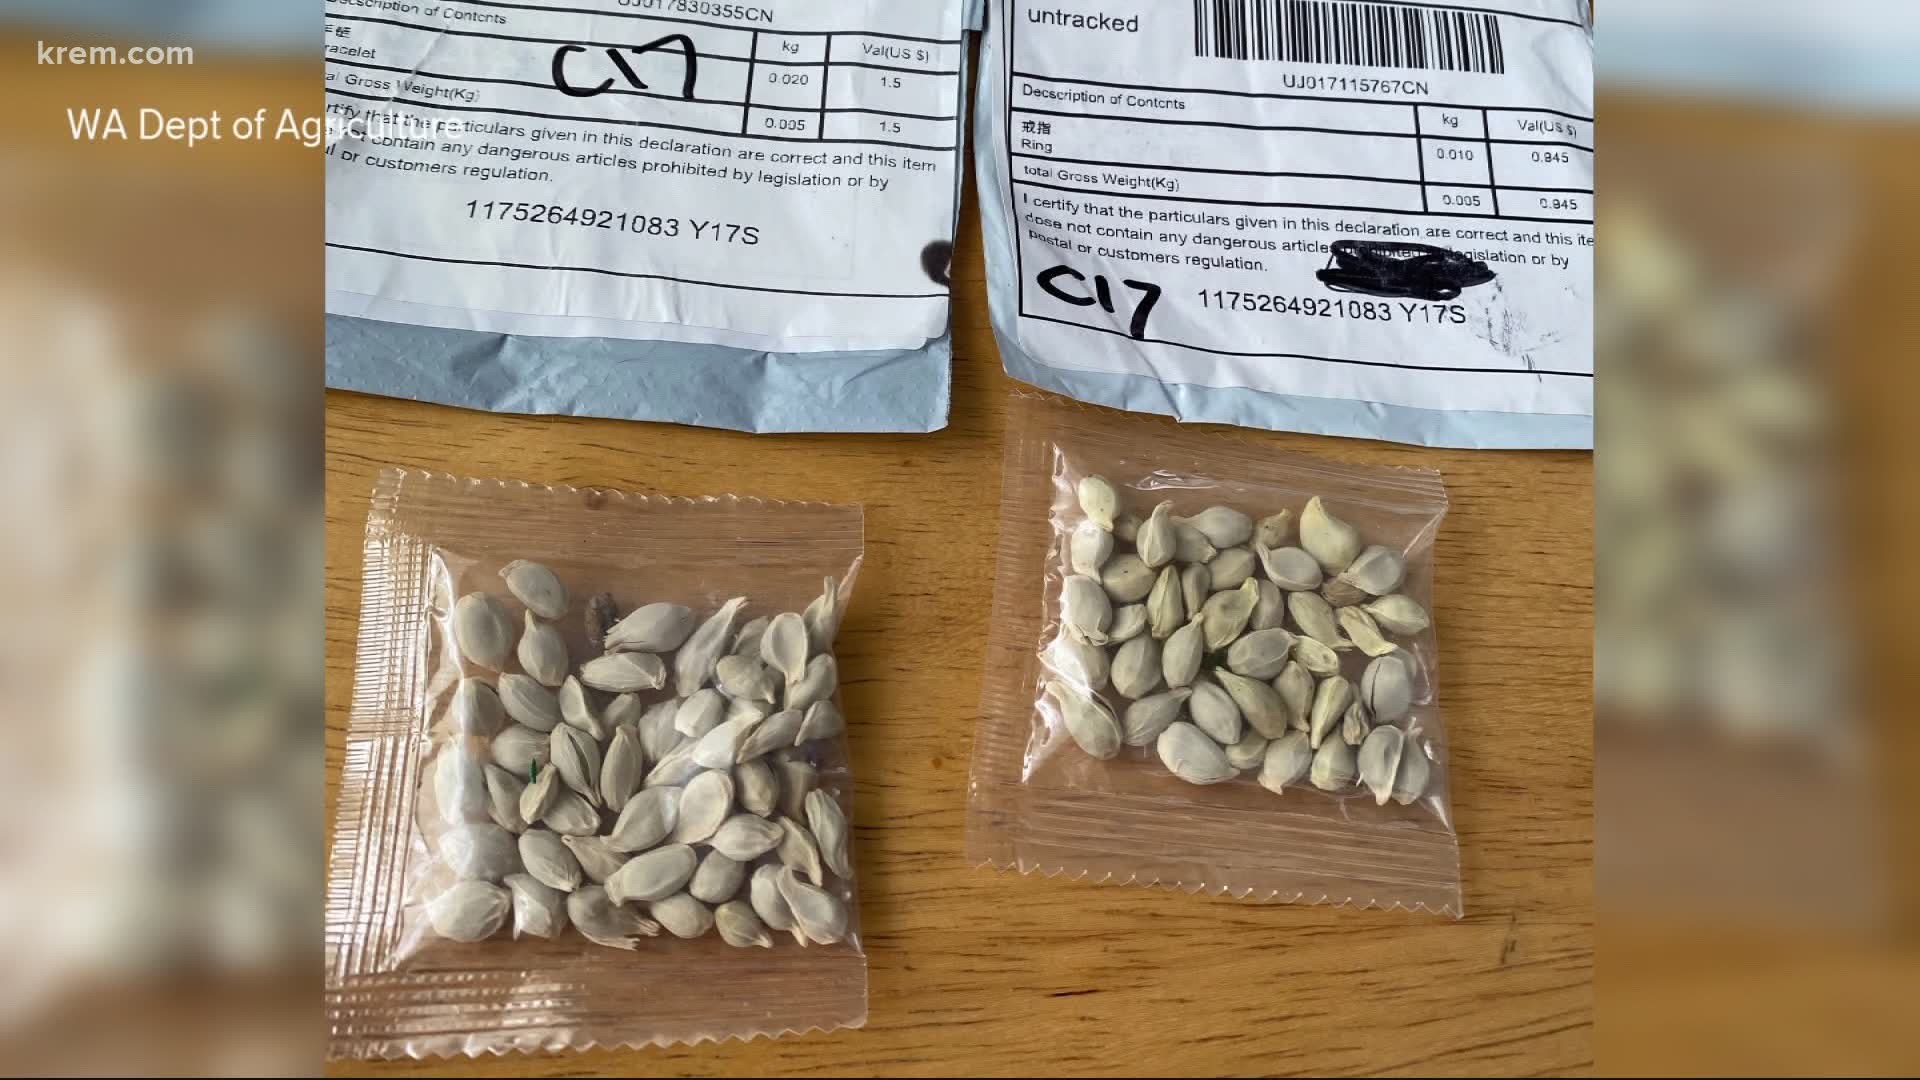 The seeds are sent in packages usually saying the contents are jewelry.